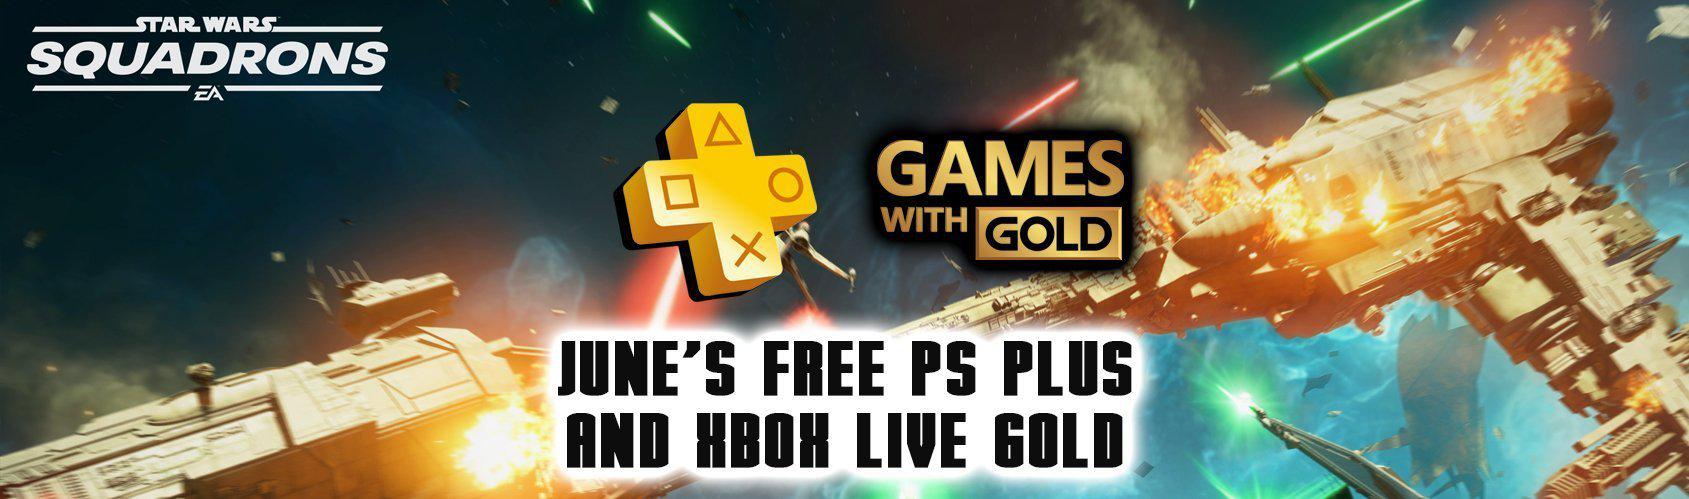 June's Free PS Plus and Xbox Live Gold-Custom Controllers UK